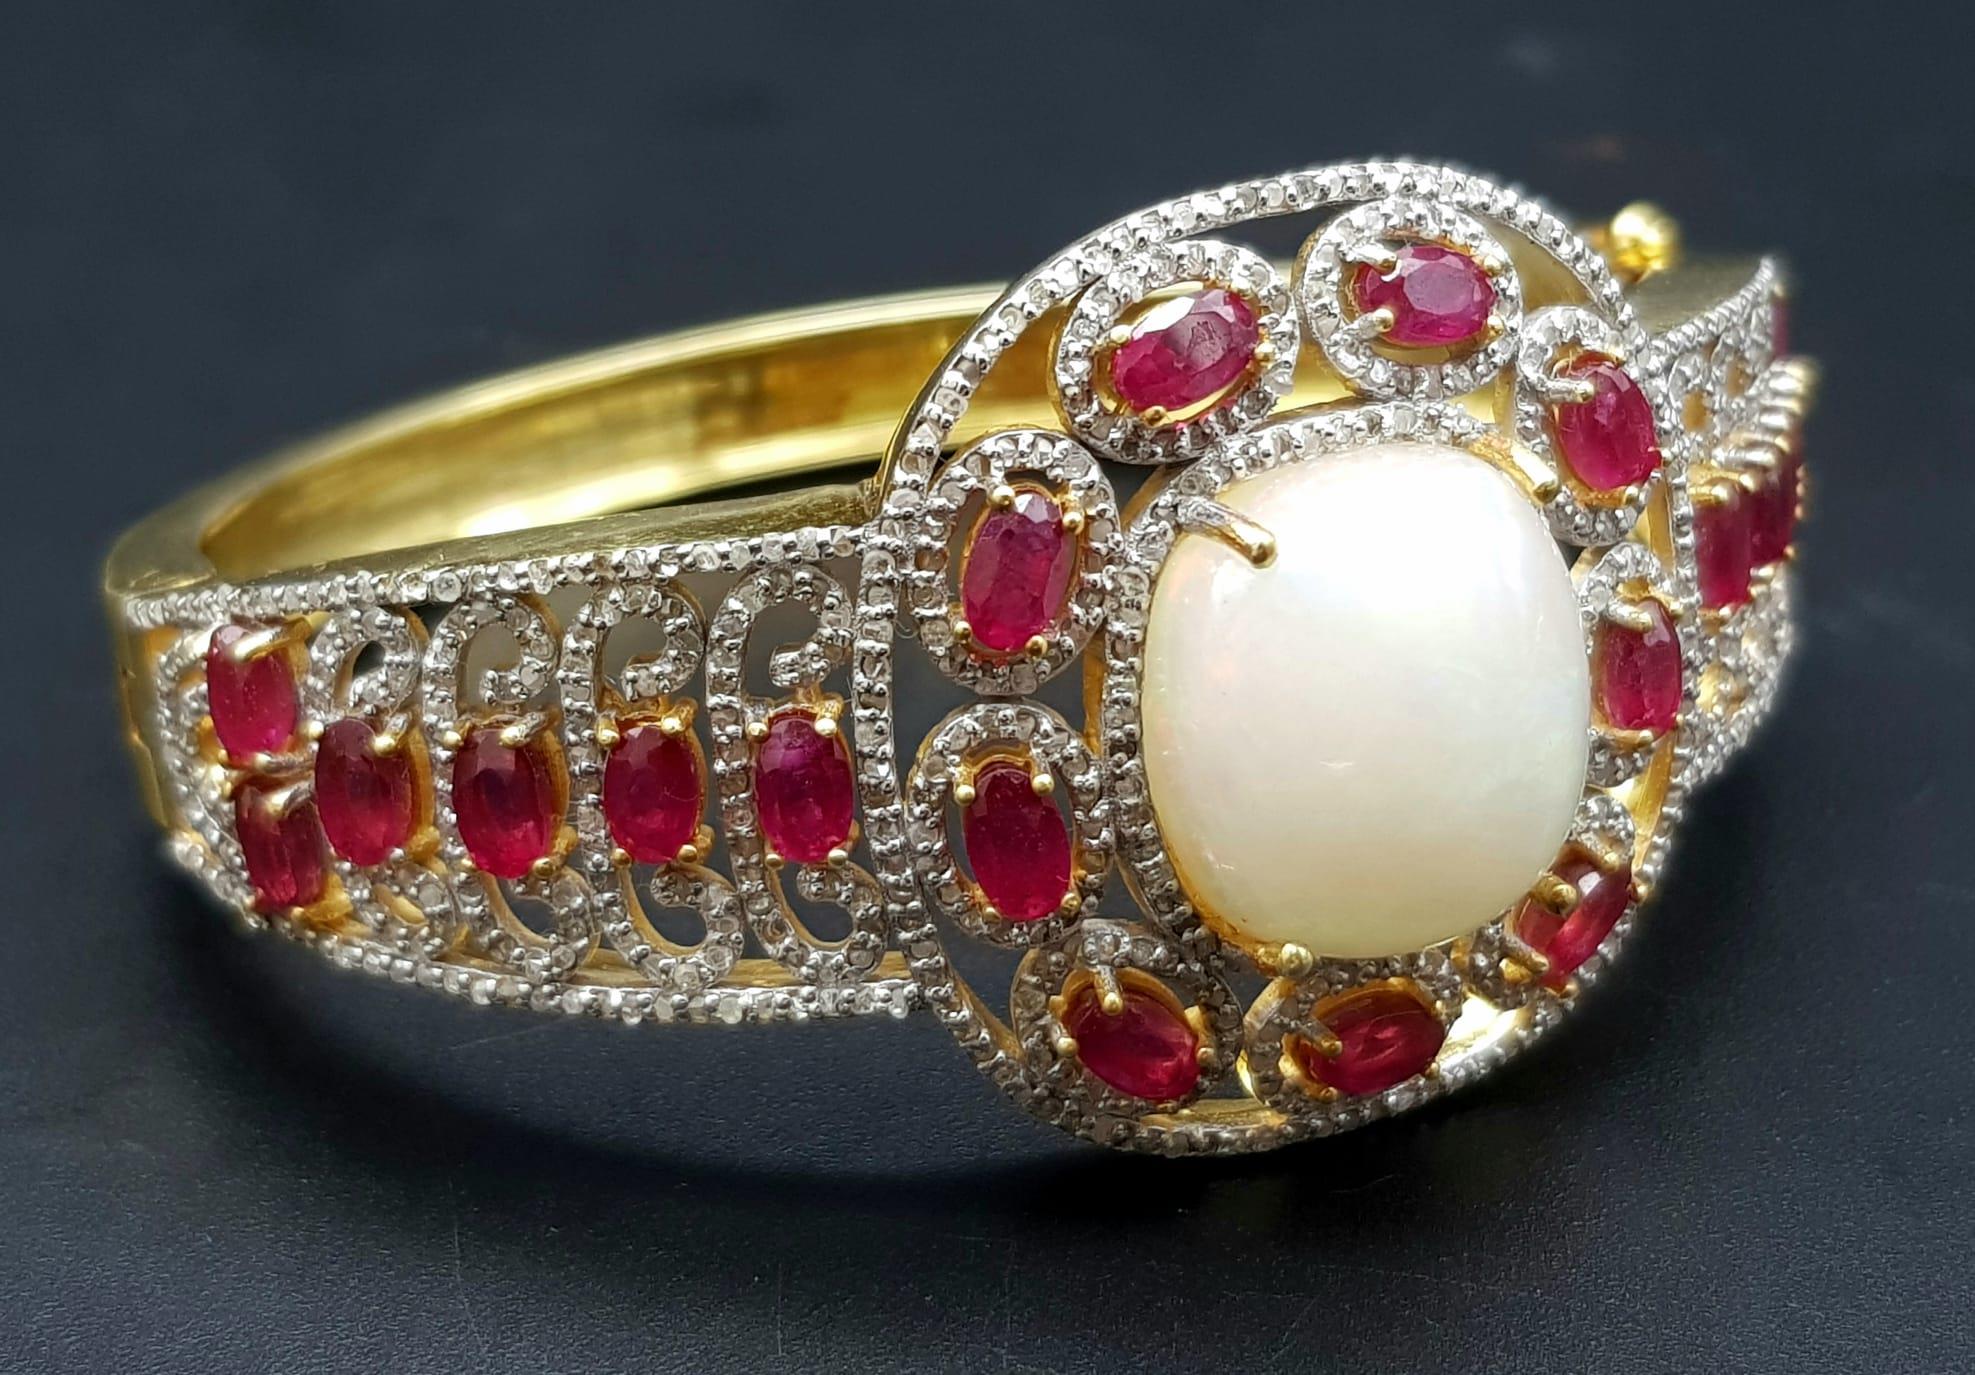 A Wonderful Majestic Colour-Play 12ct Opal and Ruby Gemstone Cuff Bracelet with Diamond Accents.